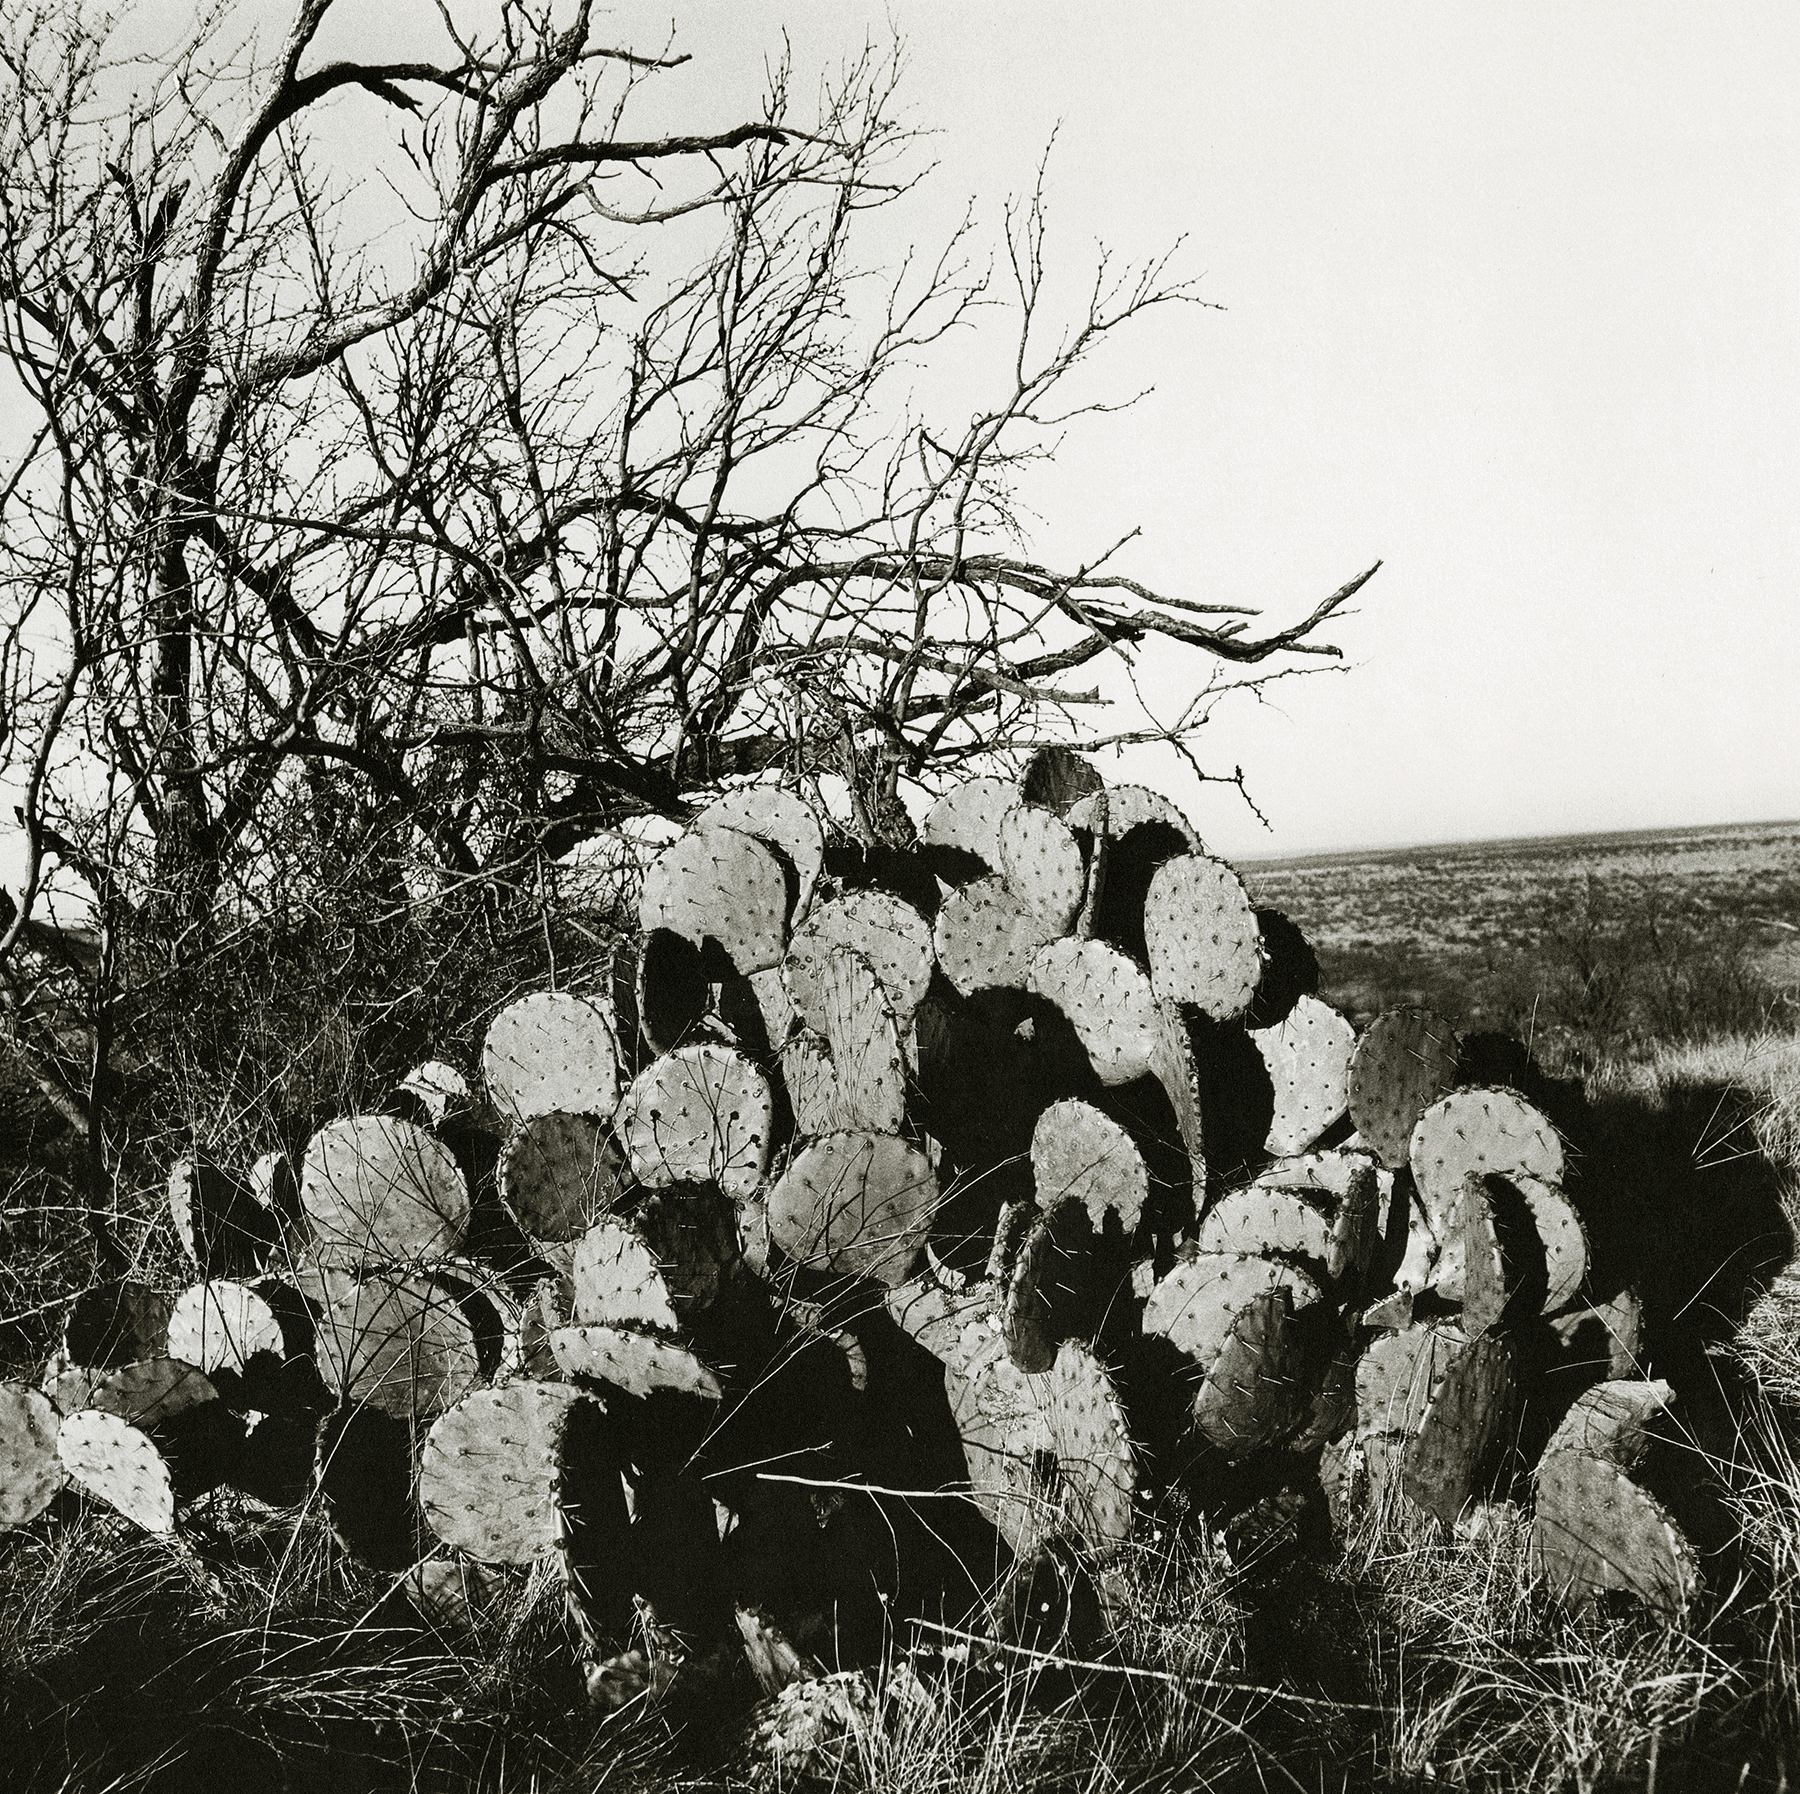 Laura Wilson "A Clump of Prickly Pear Cactus and a Mesquite Tree," 1988 silver gelatin print on paper, Museum purchase, 1991.3.12